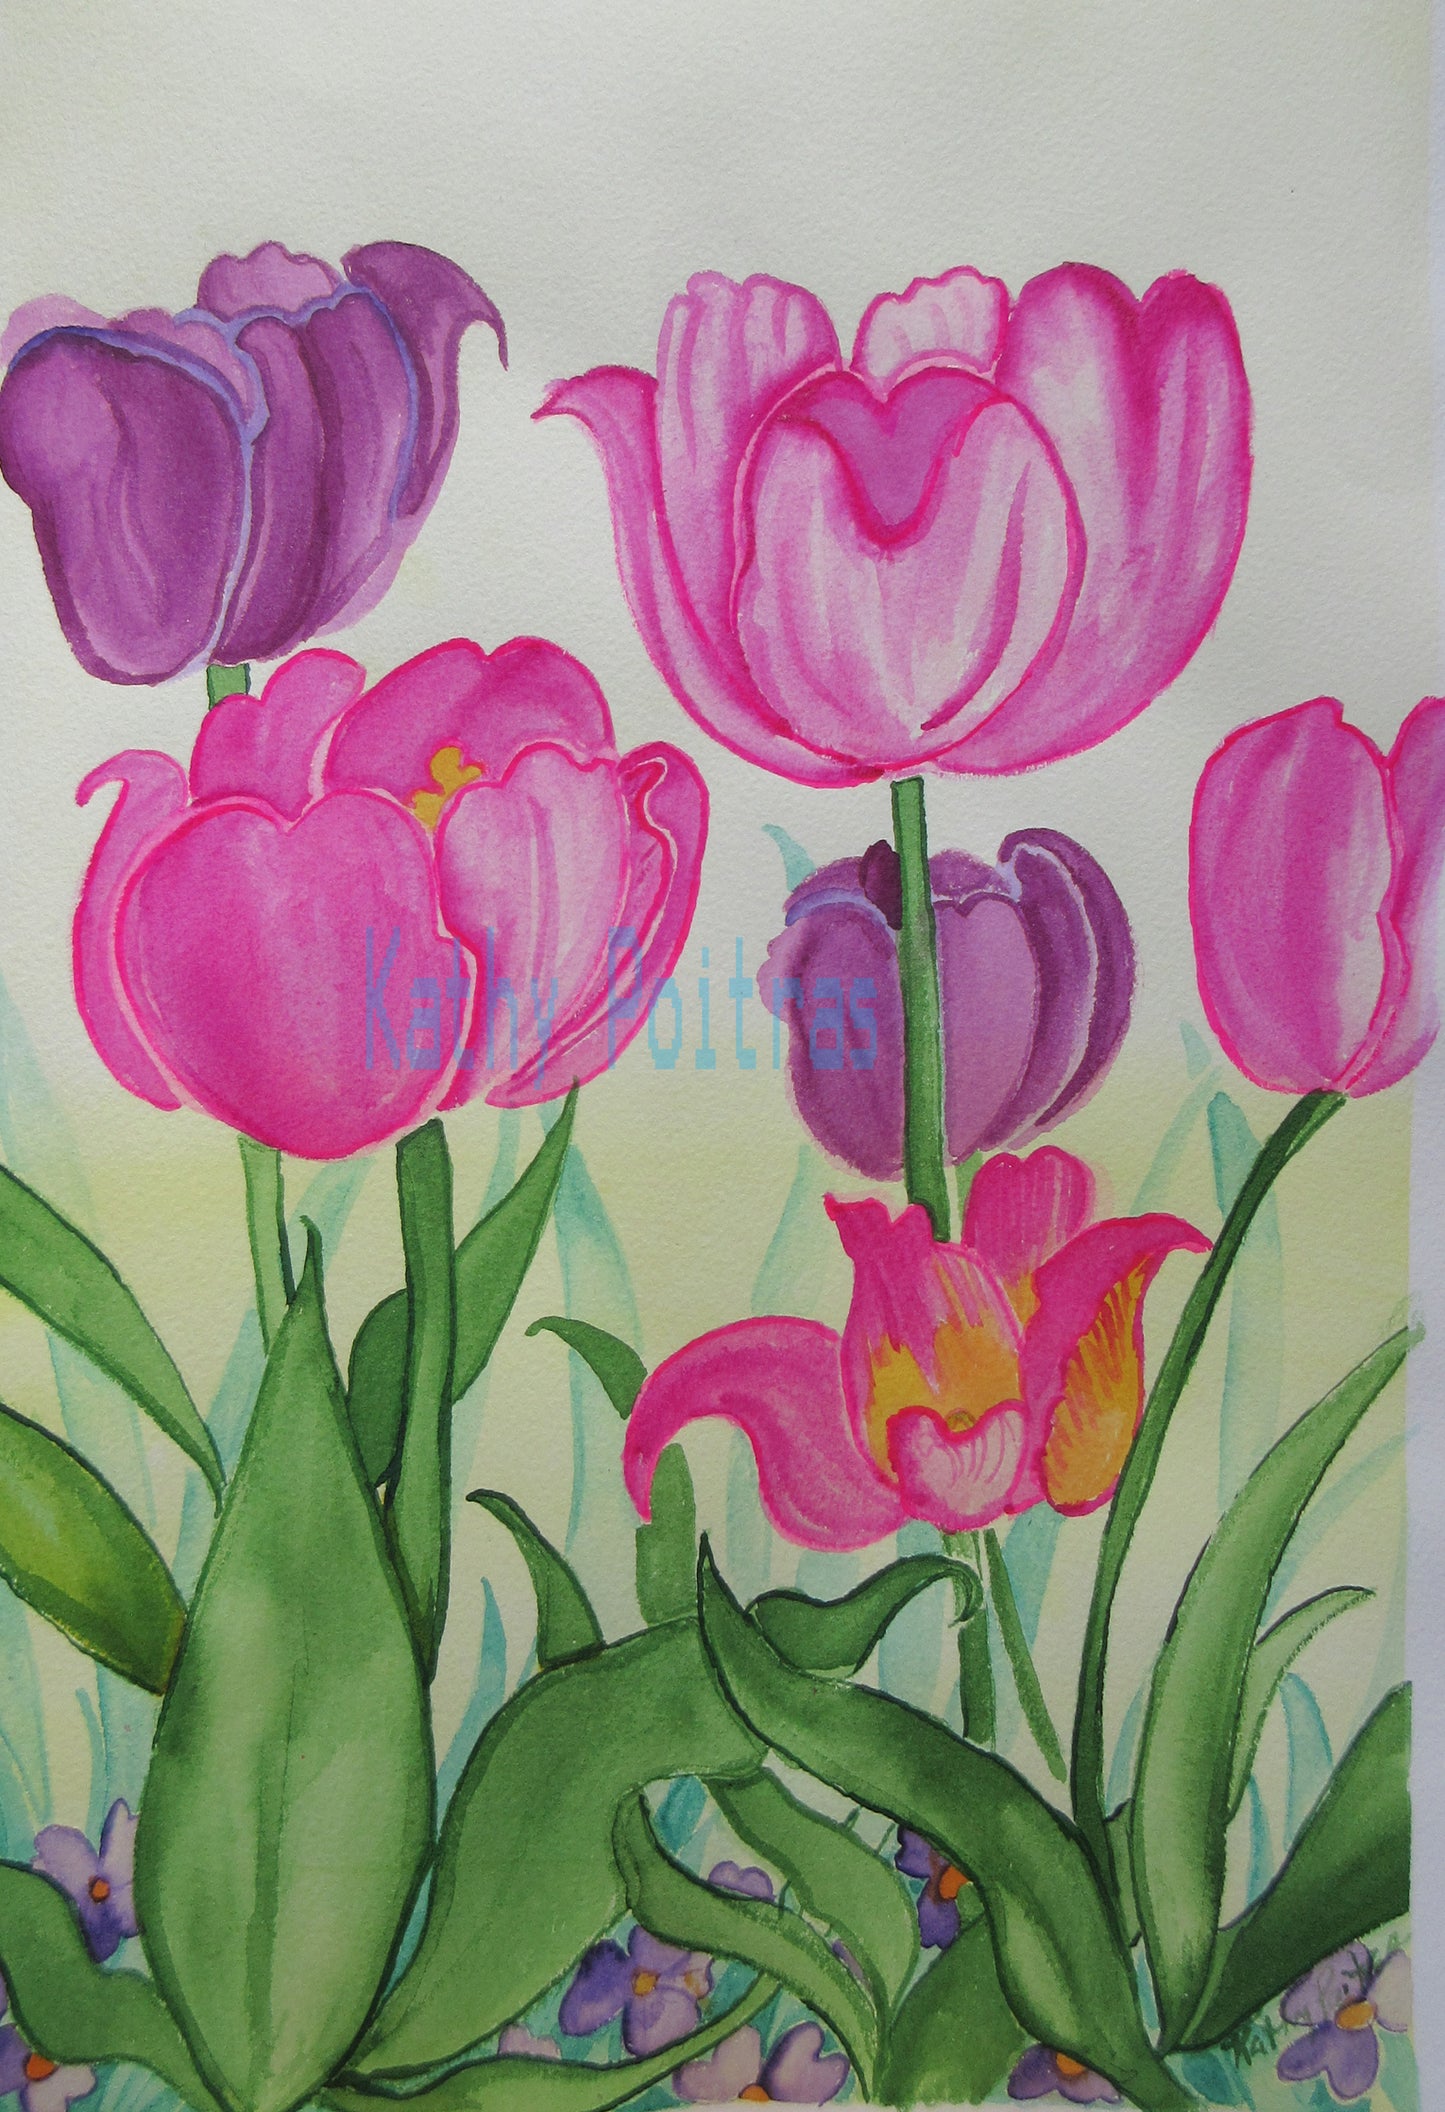 naive watercolor and ink painting of bright pink and mauve tulips with lots of character. By artist Kathy Poitras